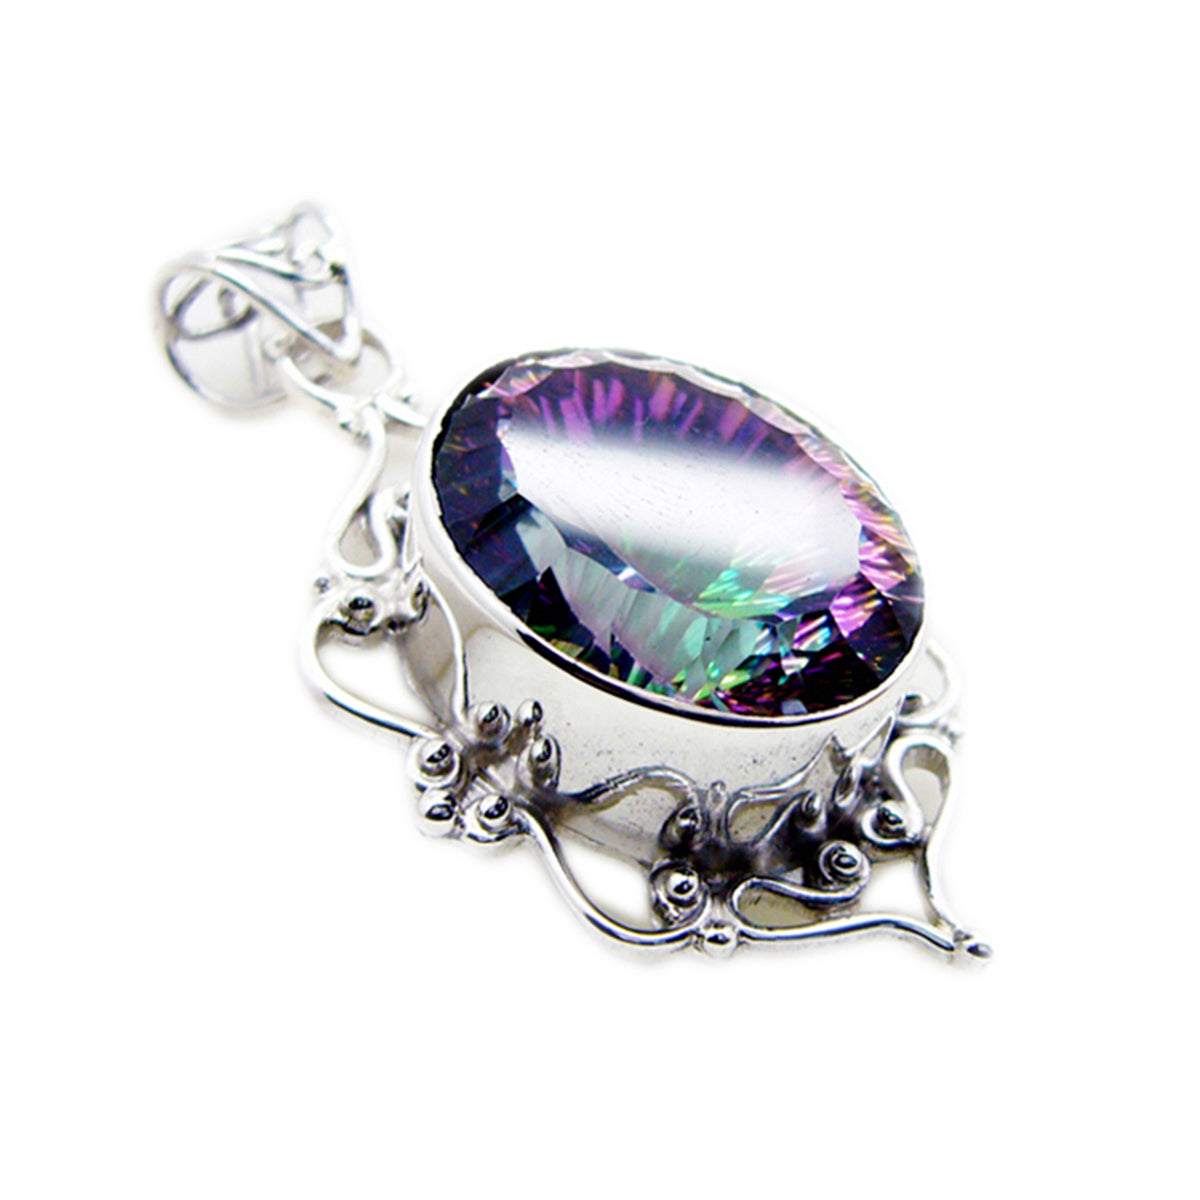 Riyo Tasty Gems Oval Faceted Multi Color Mystic Quartz Solid Silver Pendant Gift For Good Friday